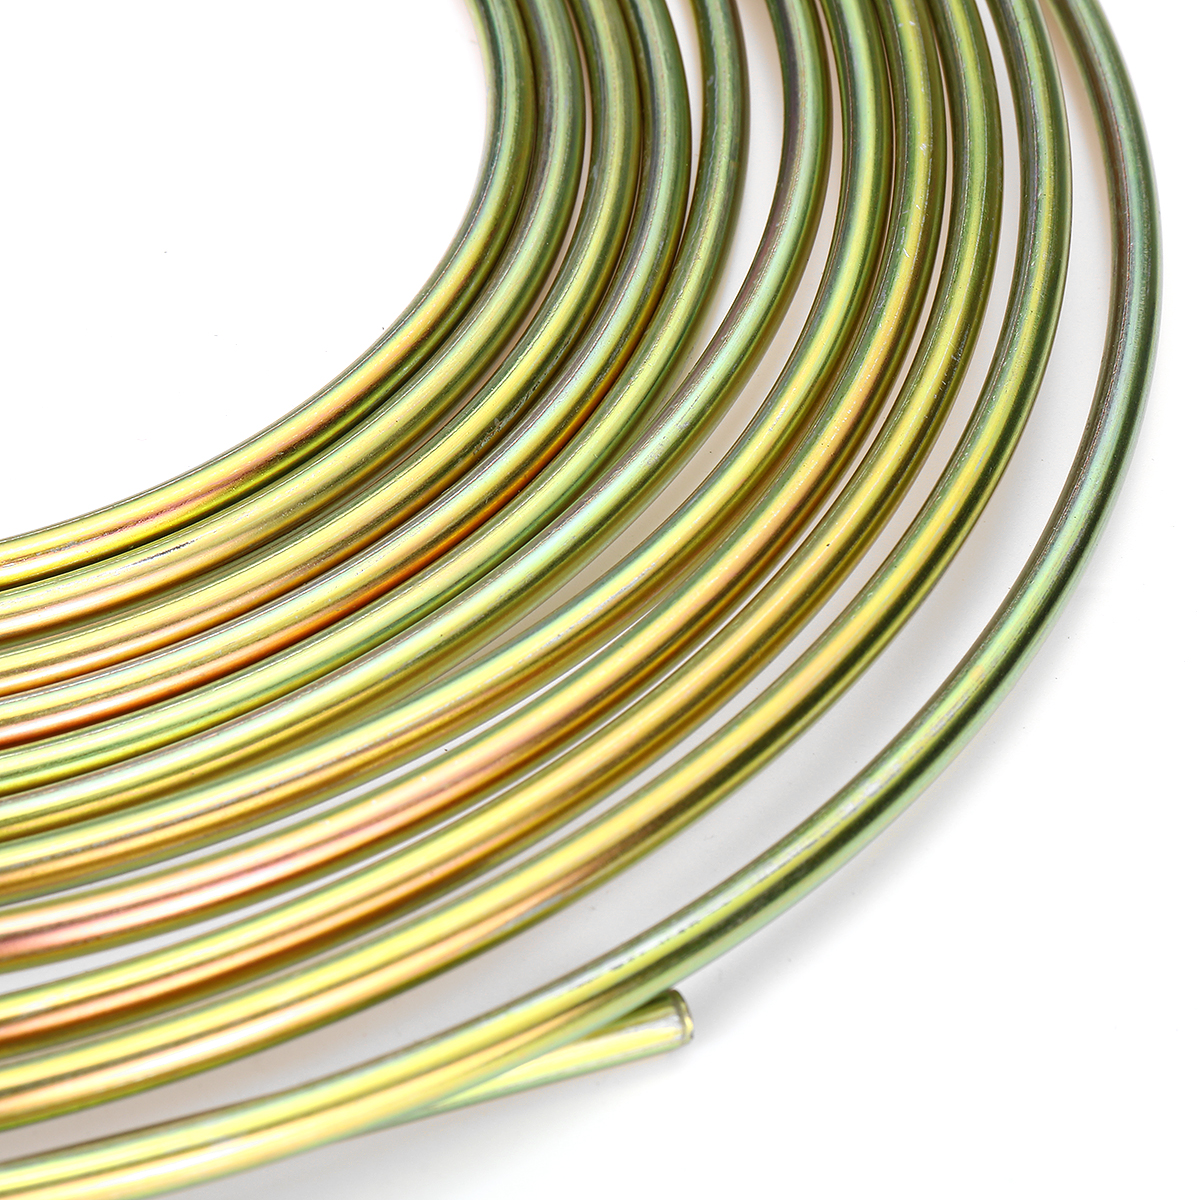 25ft-Roll-of-316-Plated-Brake-Line-Tubing-OD-Copper-Nickel-With-16x-Tube-Nuts-1686126-8